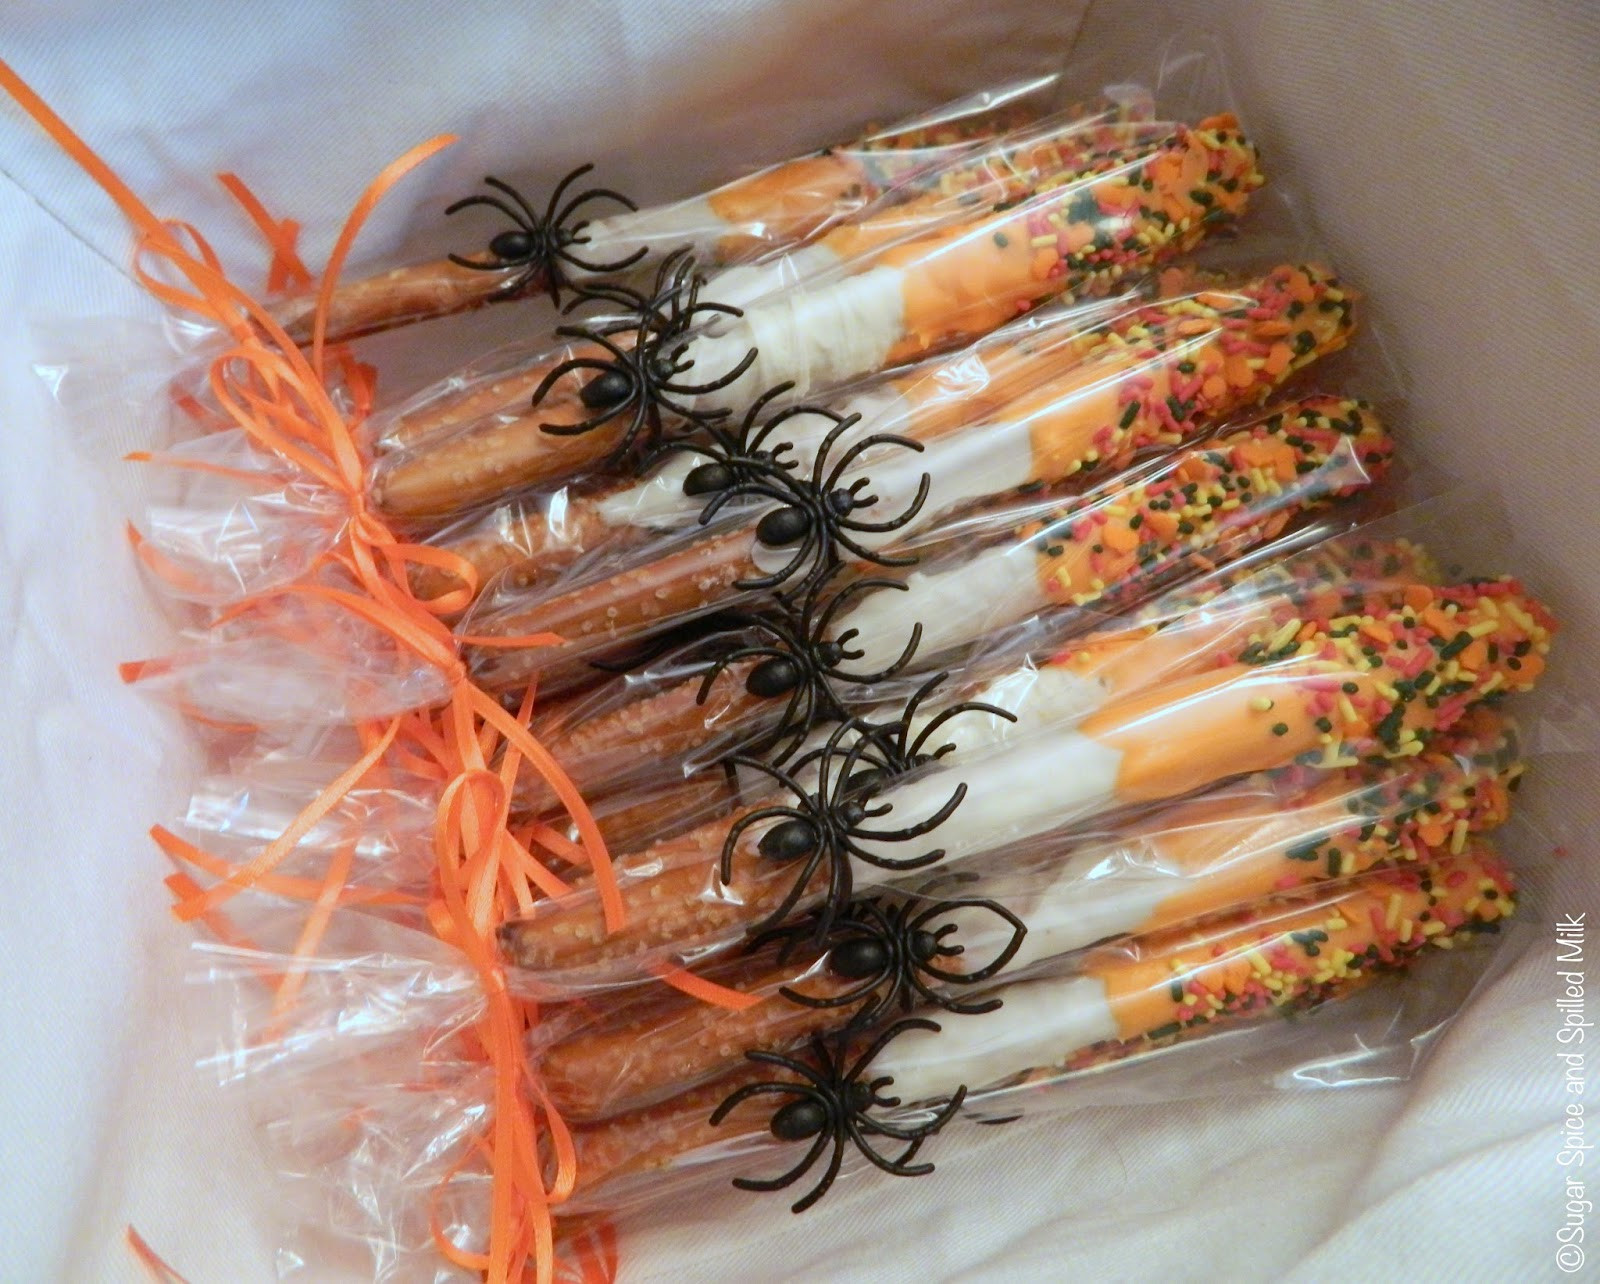 Chocolate Dipped Pretzels For Halloween
 Sugar Spice and Spilled Milk Dipped Pretzel Rods for